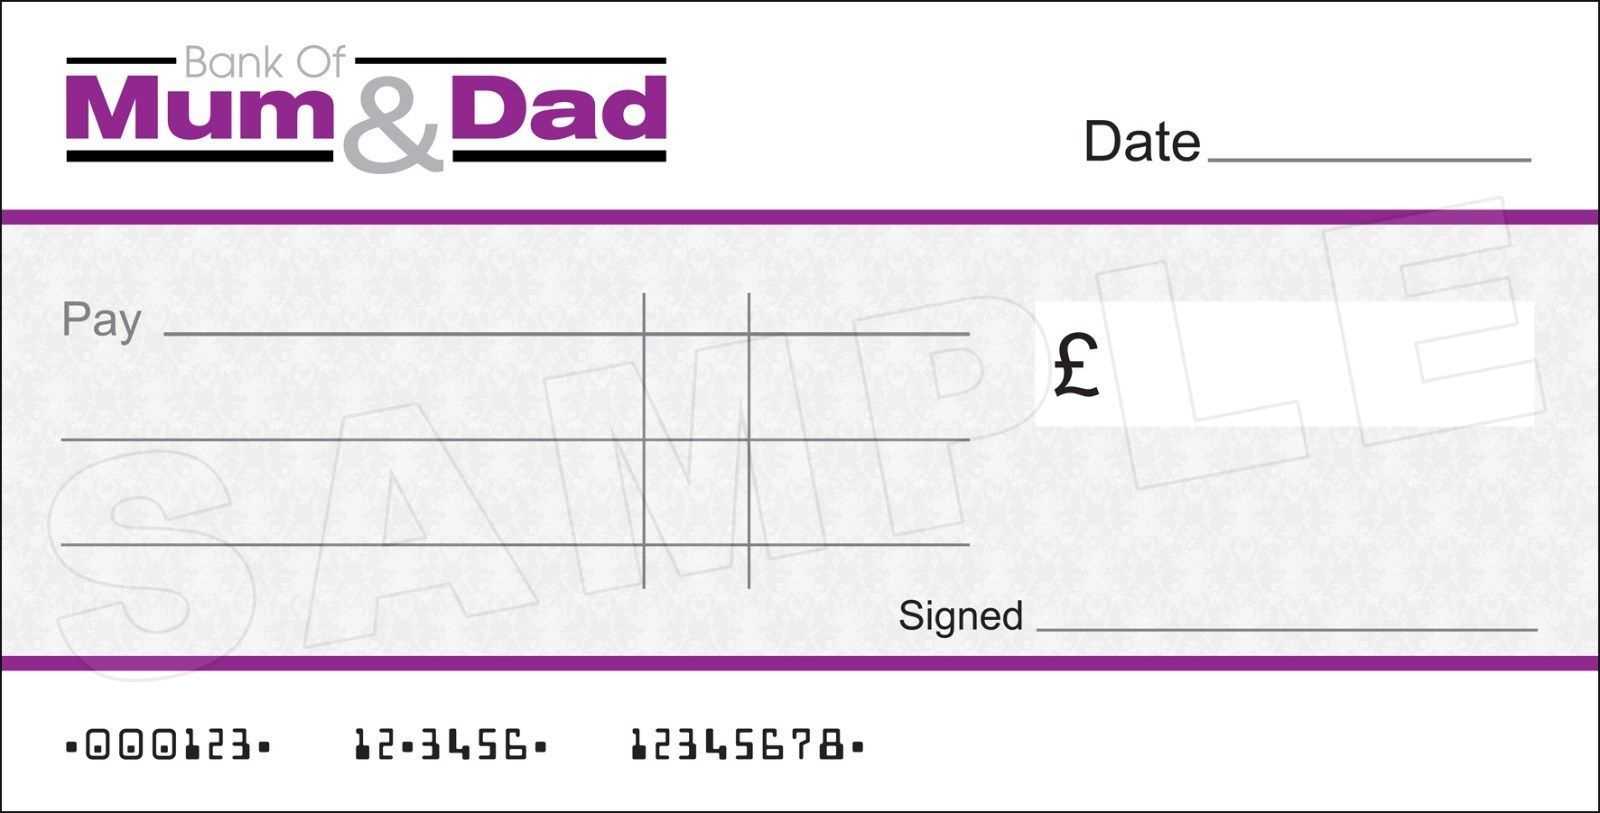 Details About Large Blank Bank Of Mum & Dad Cheque | Dads With Large Blank Cheque Template